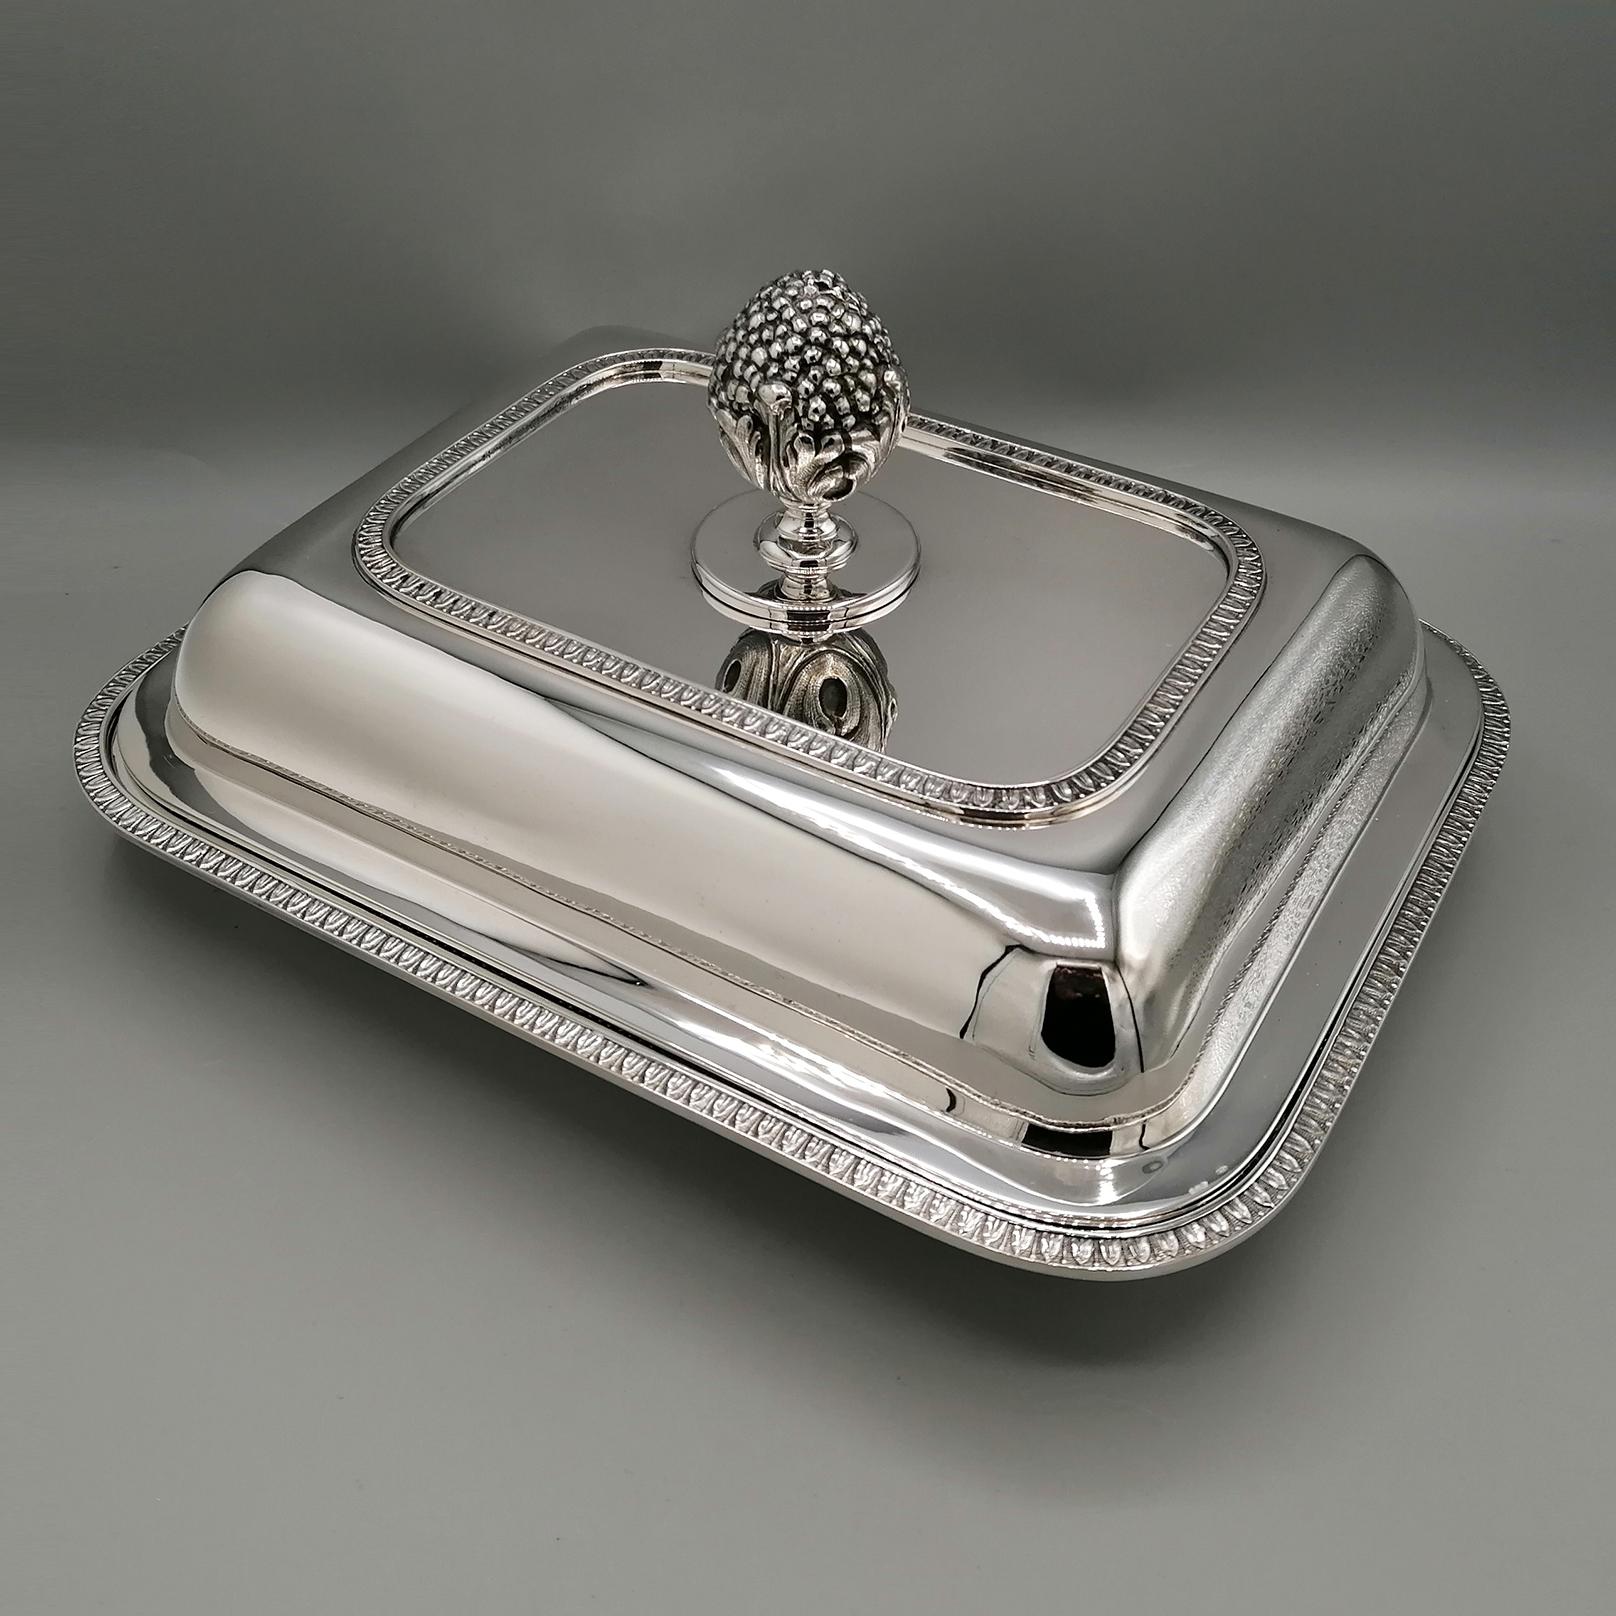 Elegant Empire style sterling silver vegetable dish.
The shape is rectangular with rounded corners.
A border has been welded onto the lower and upper parts, created with the Empire style casting technique, characterized by the classic small palm